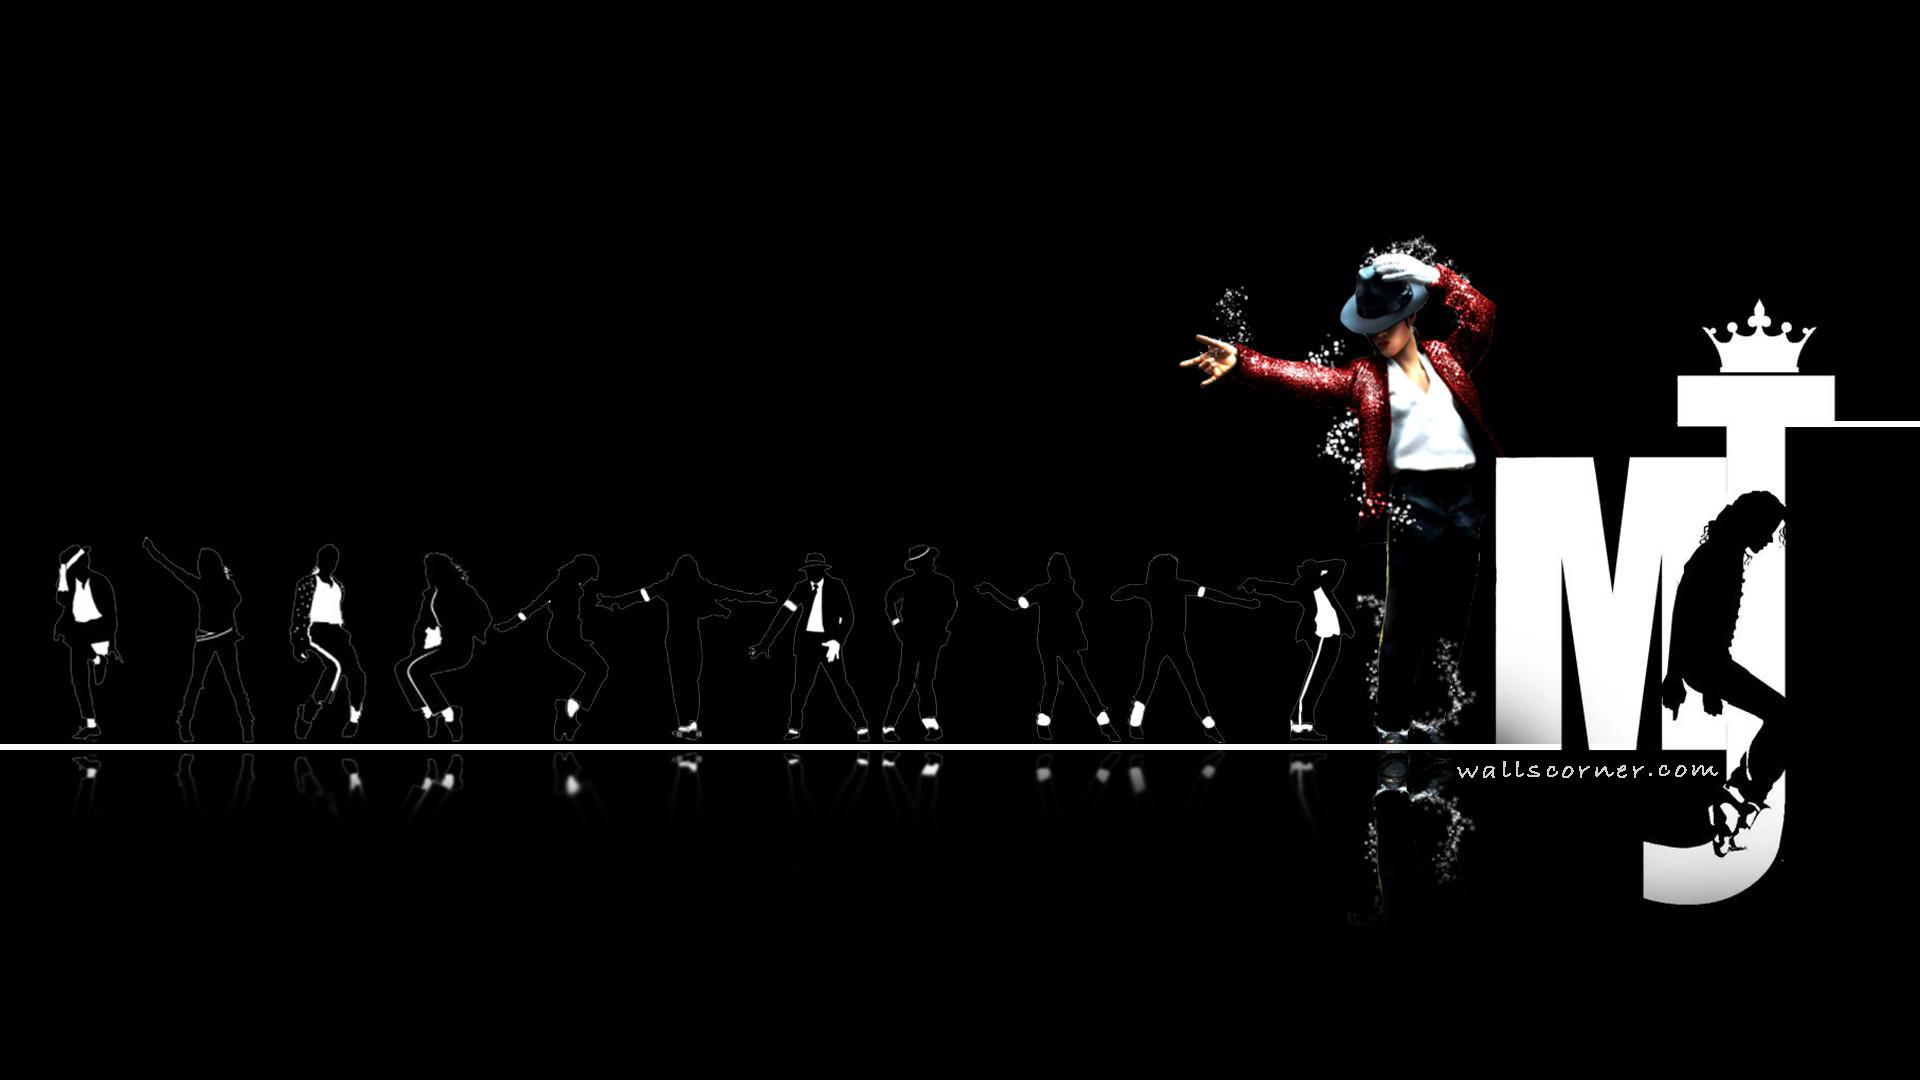 1920x1080 Michael Jackson Pictures | Hd Wallpapers | Full HD Wallpapers | Pinterest | Michael  jackson, Michael jackson pics and Jackson